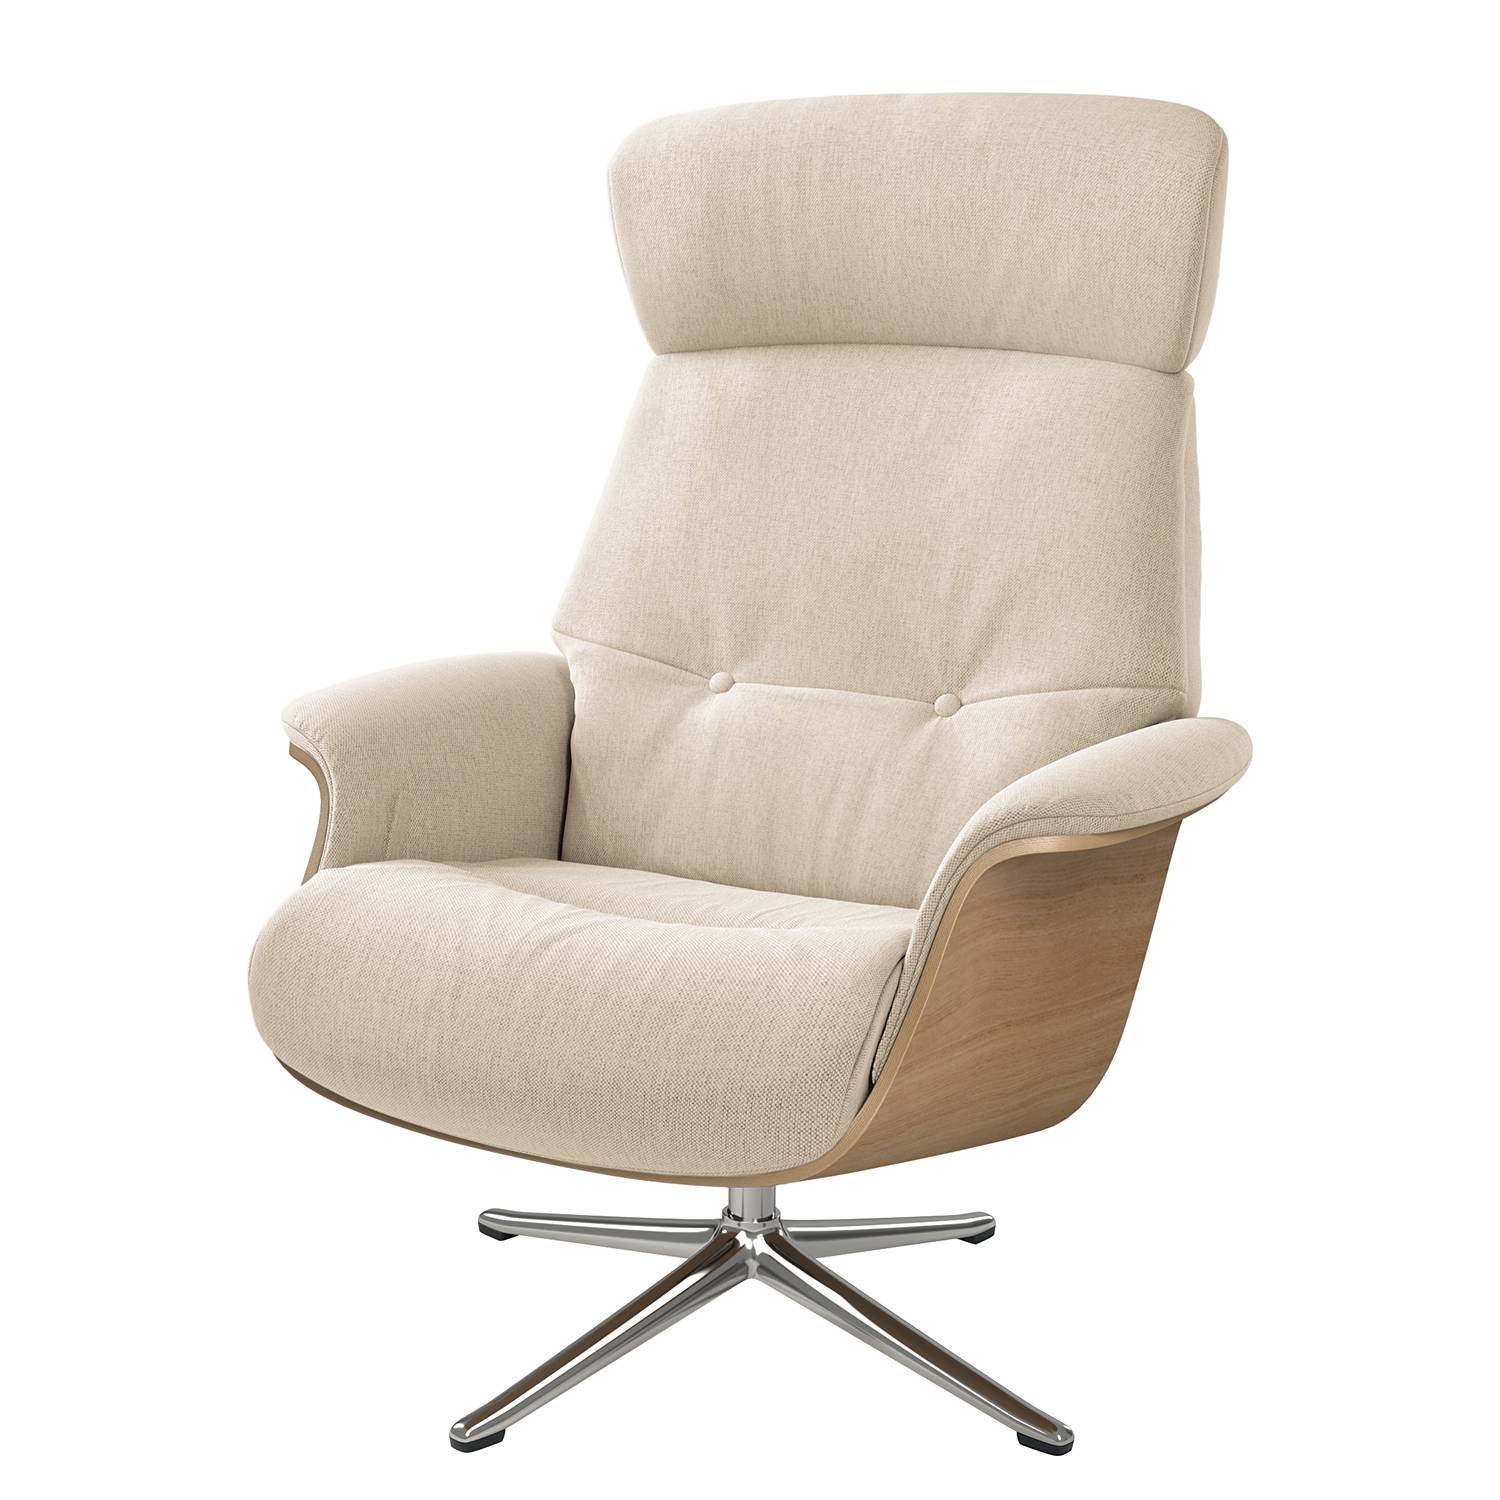 Image of Fauteuil relax Anderson IV 000000001000131269